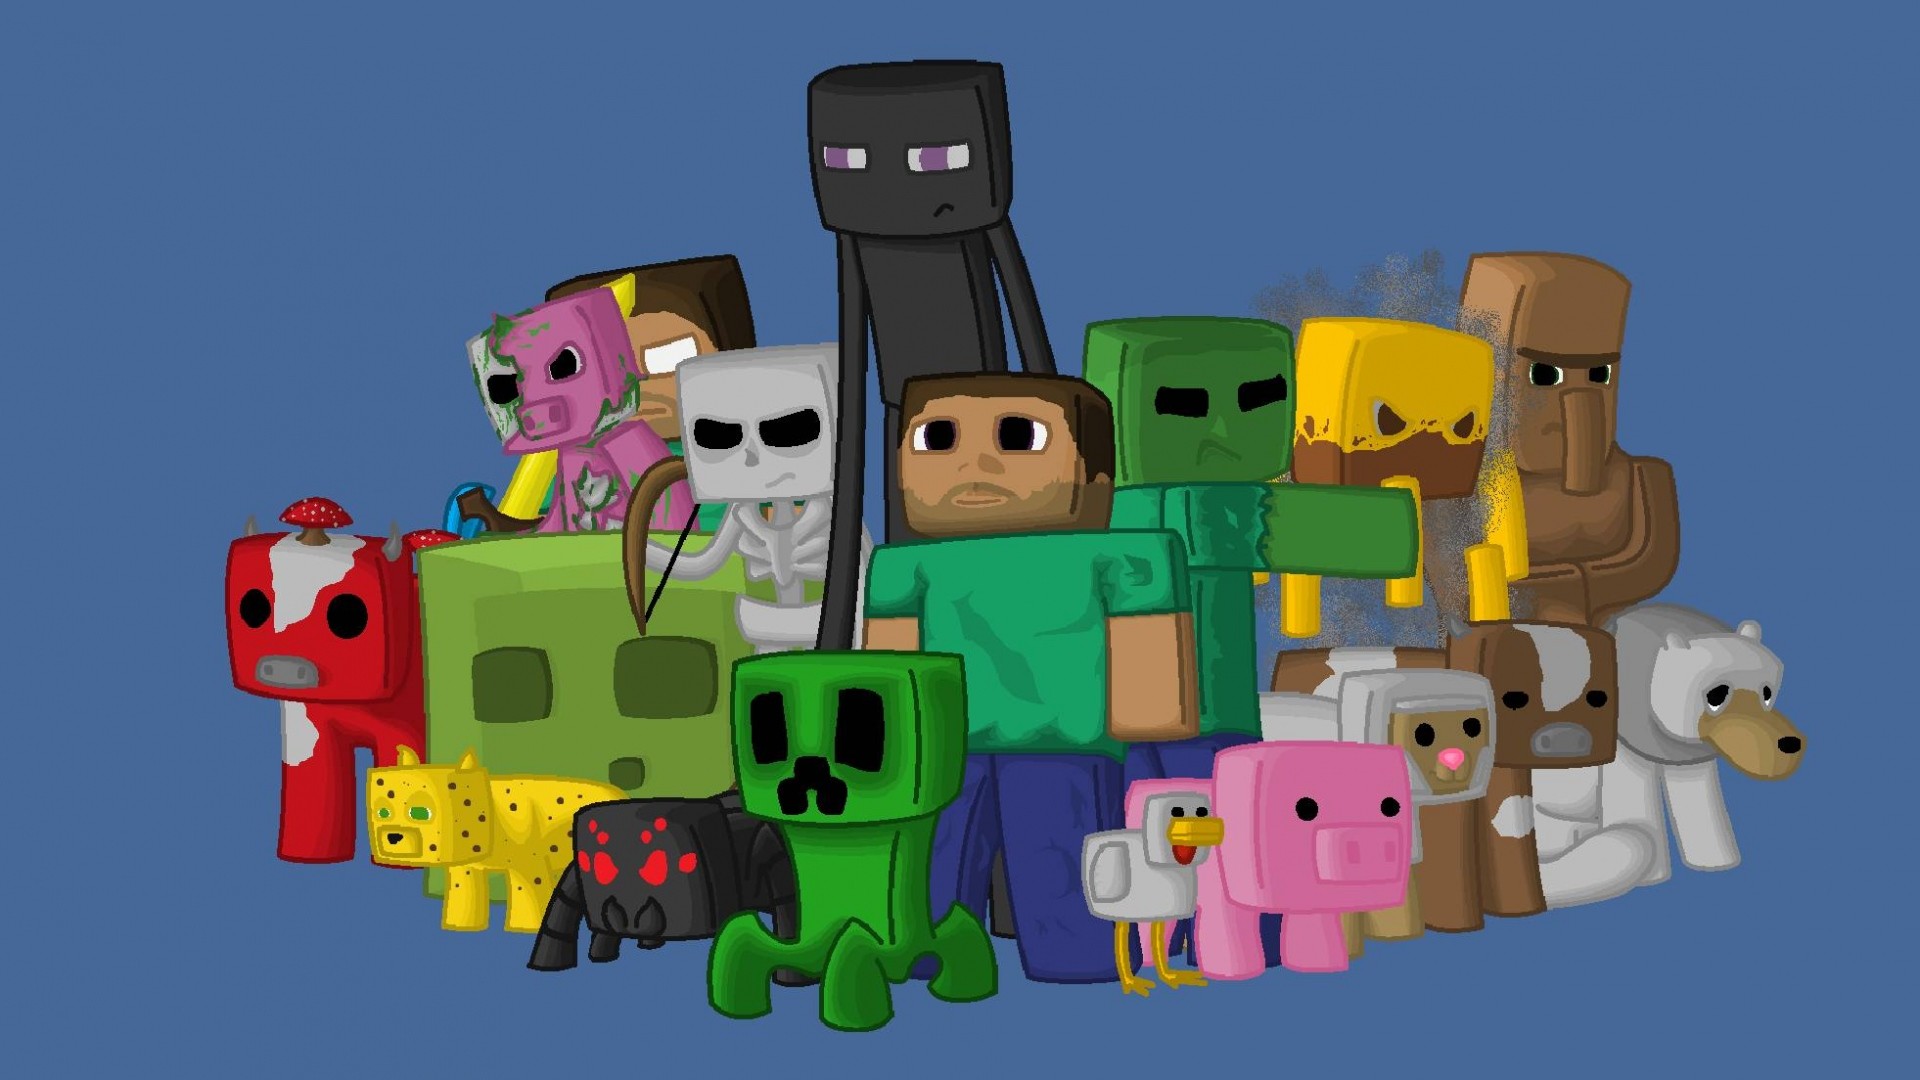 Wallpaper Of Minecraft Pictures